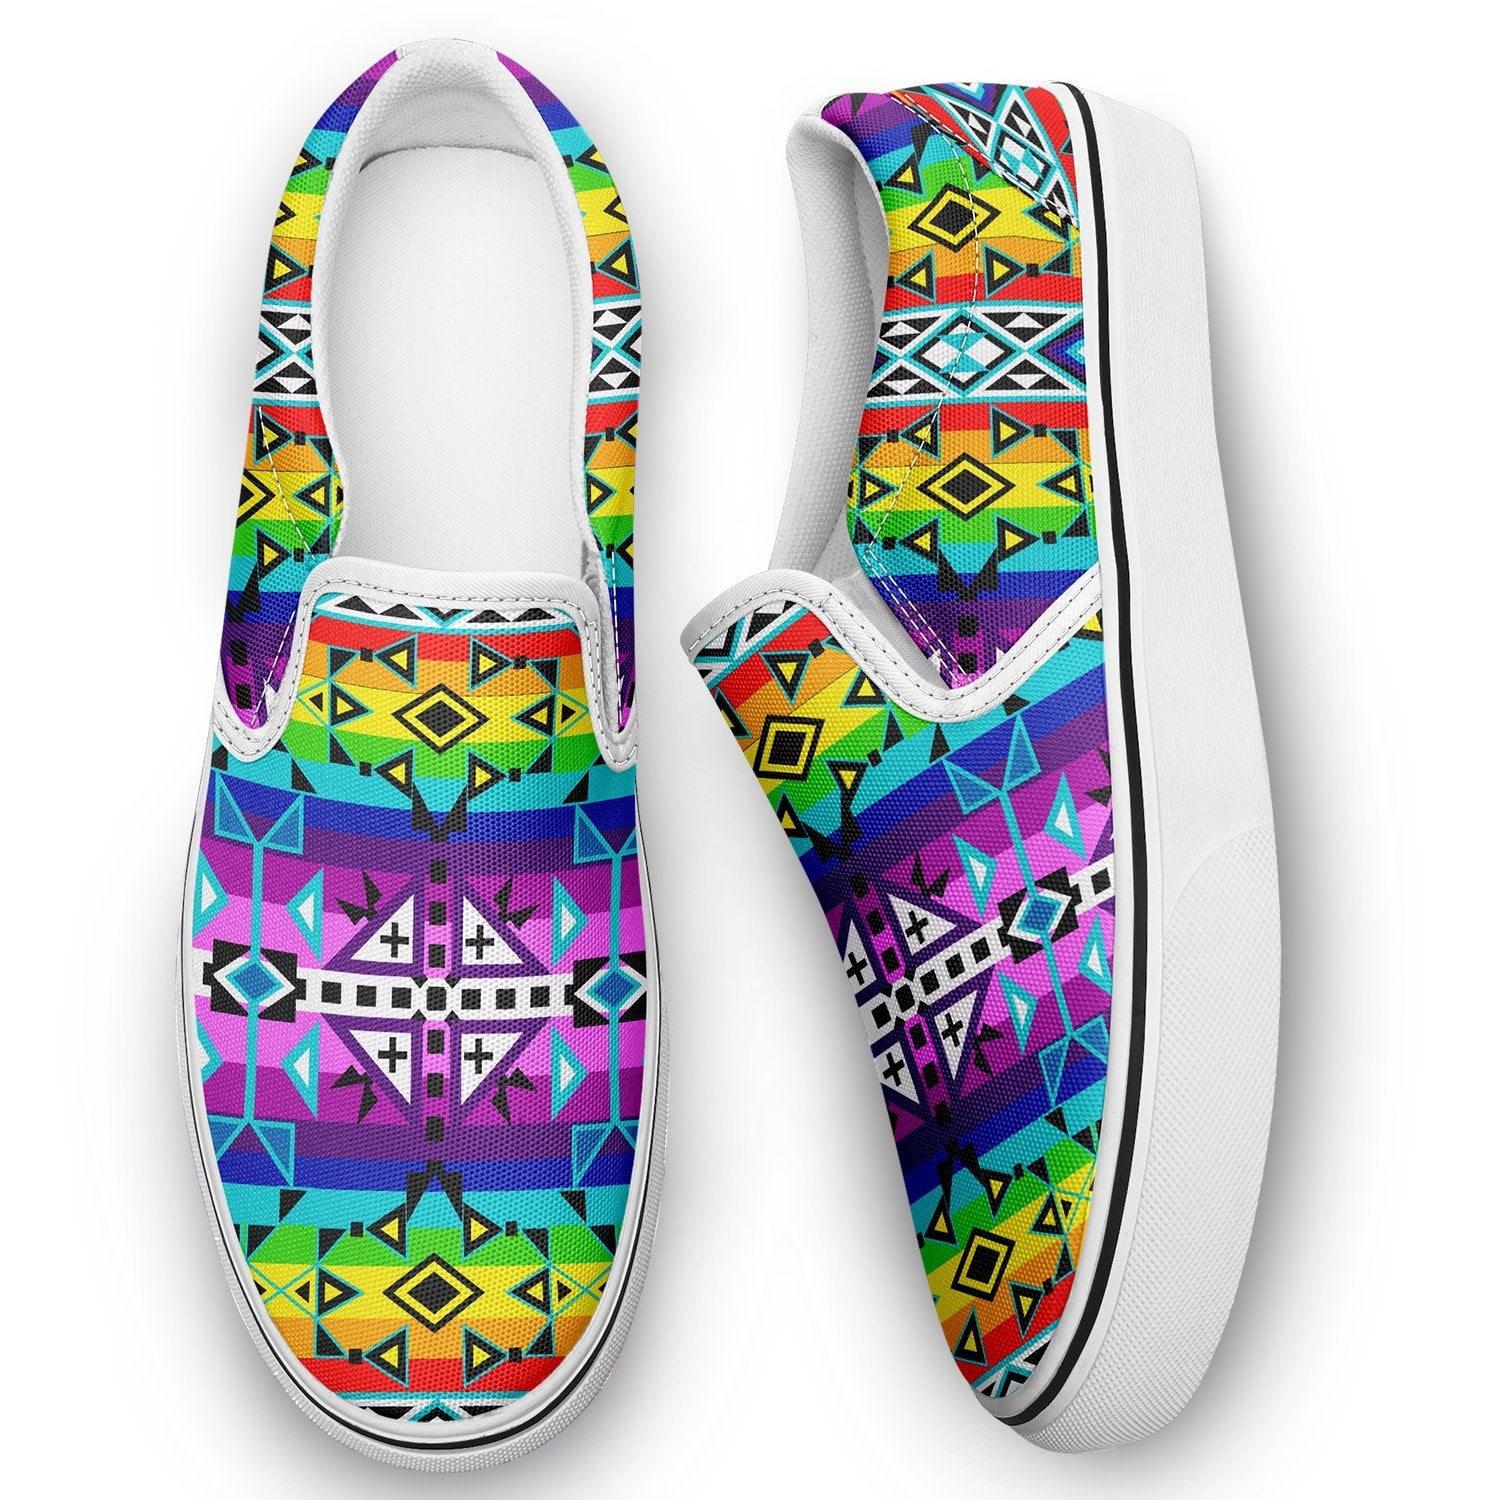 After the Rain Otoyimm Canvas Slip On Shoes 49 Dzine 